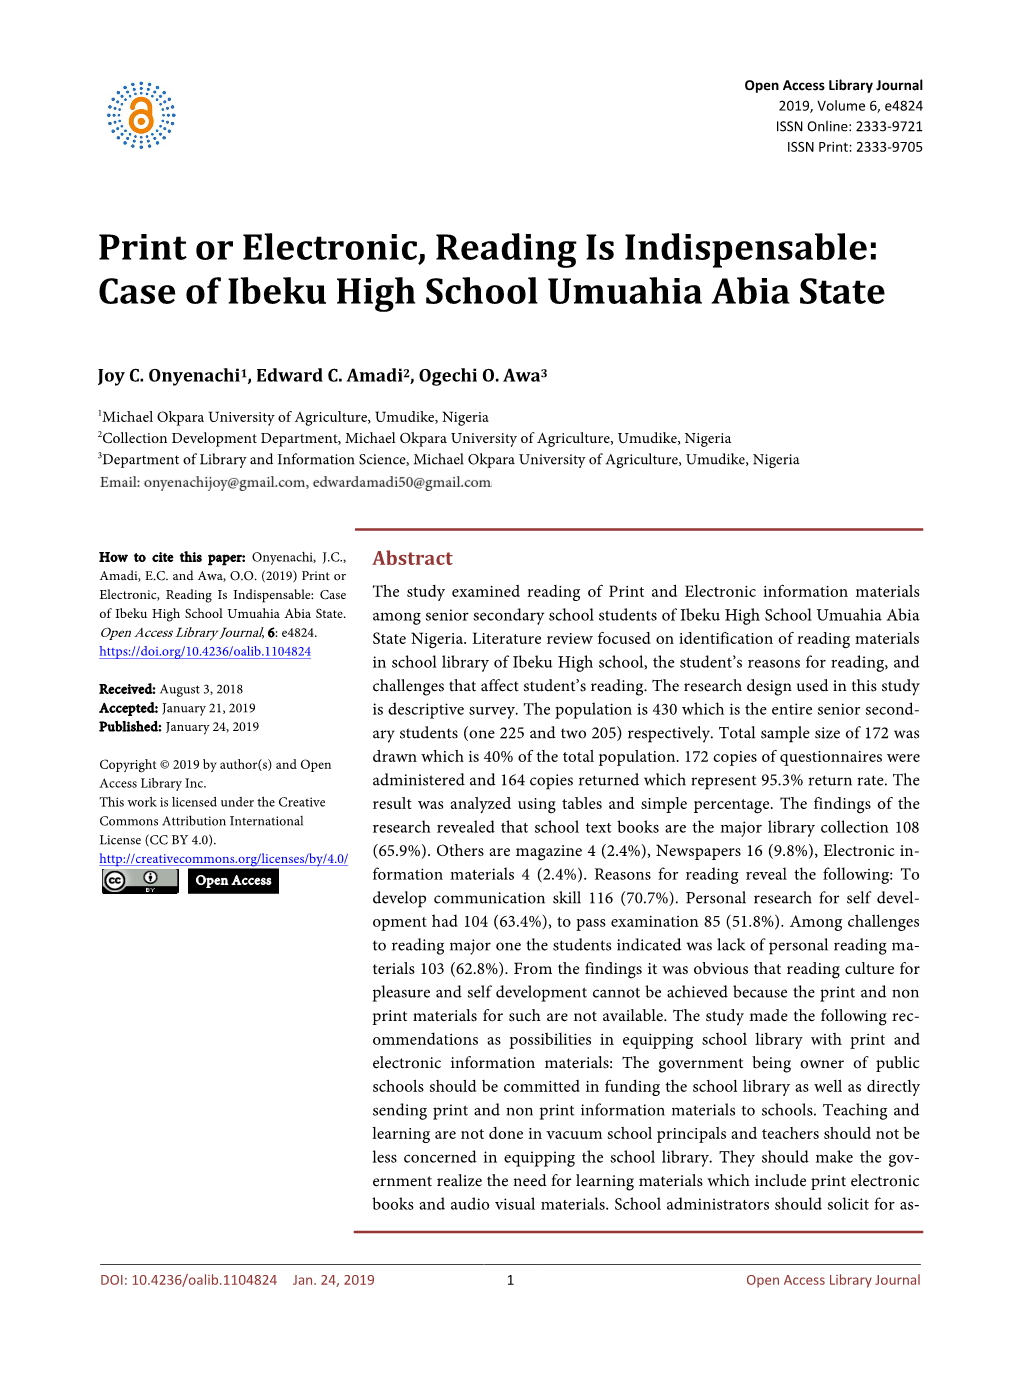 Print Or Electronic, Reading Is Indispensable: Case of Ibeku High School Umuahia Abia State